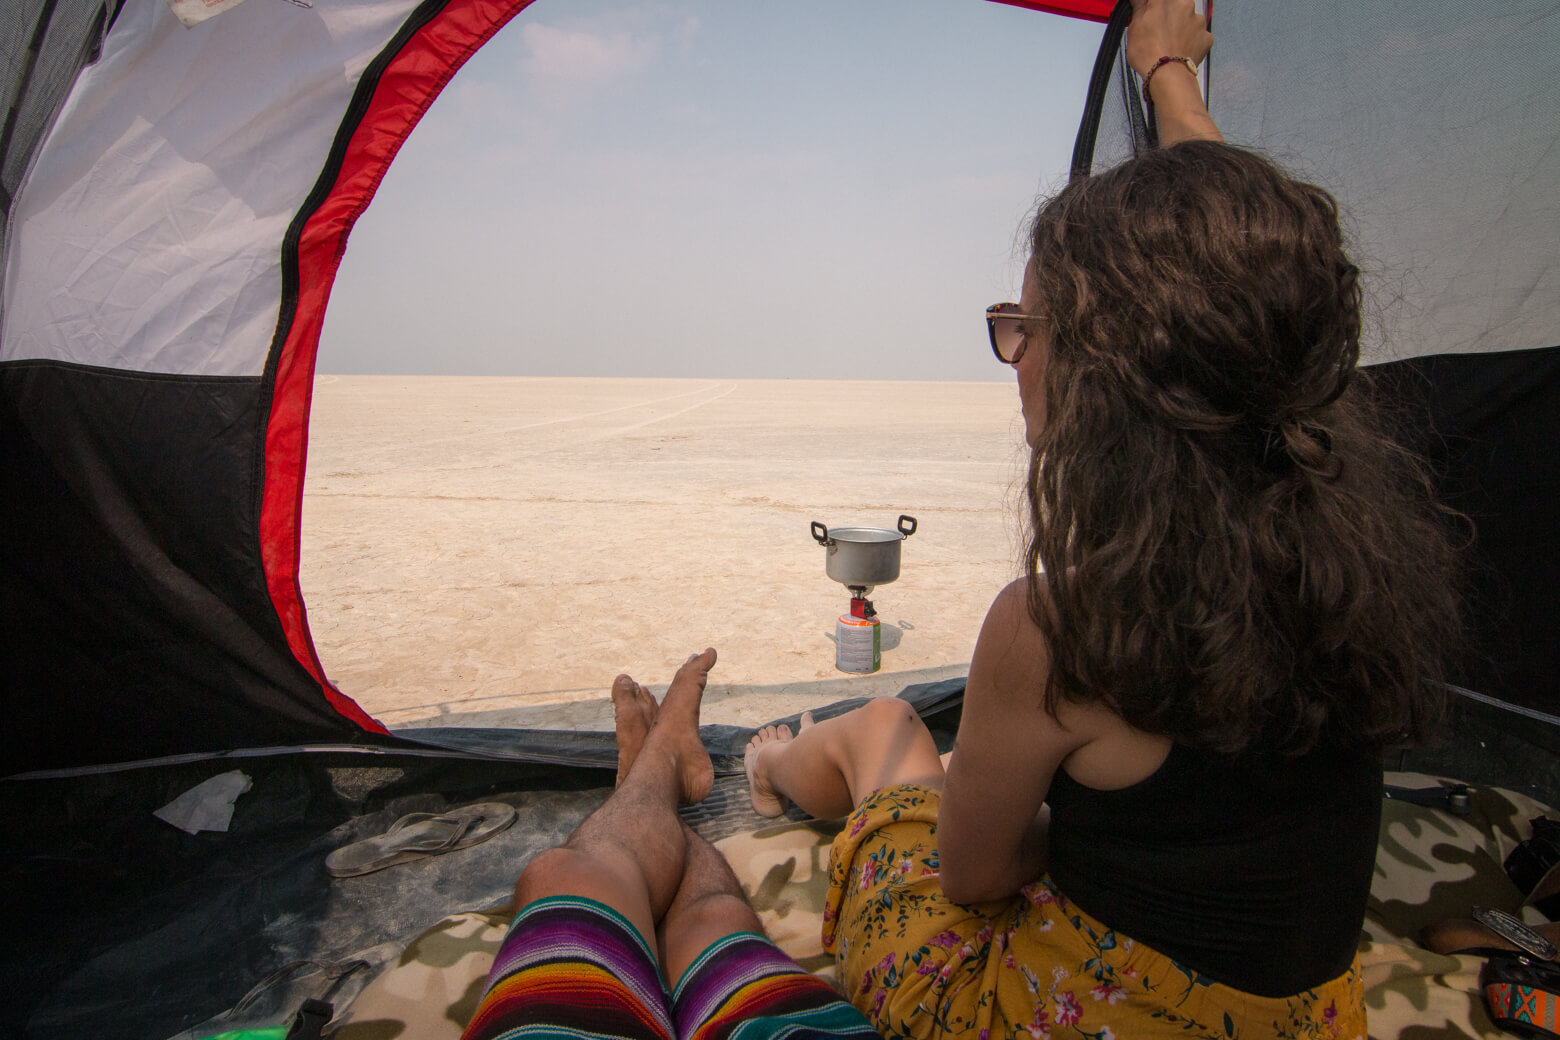 Nina and Garrett inside a small red tent looking out onto the Alvord Desert while boiling water on a jet boil.